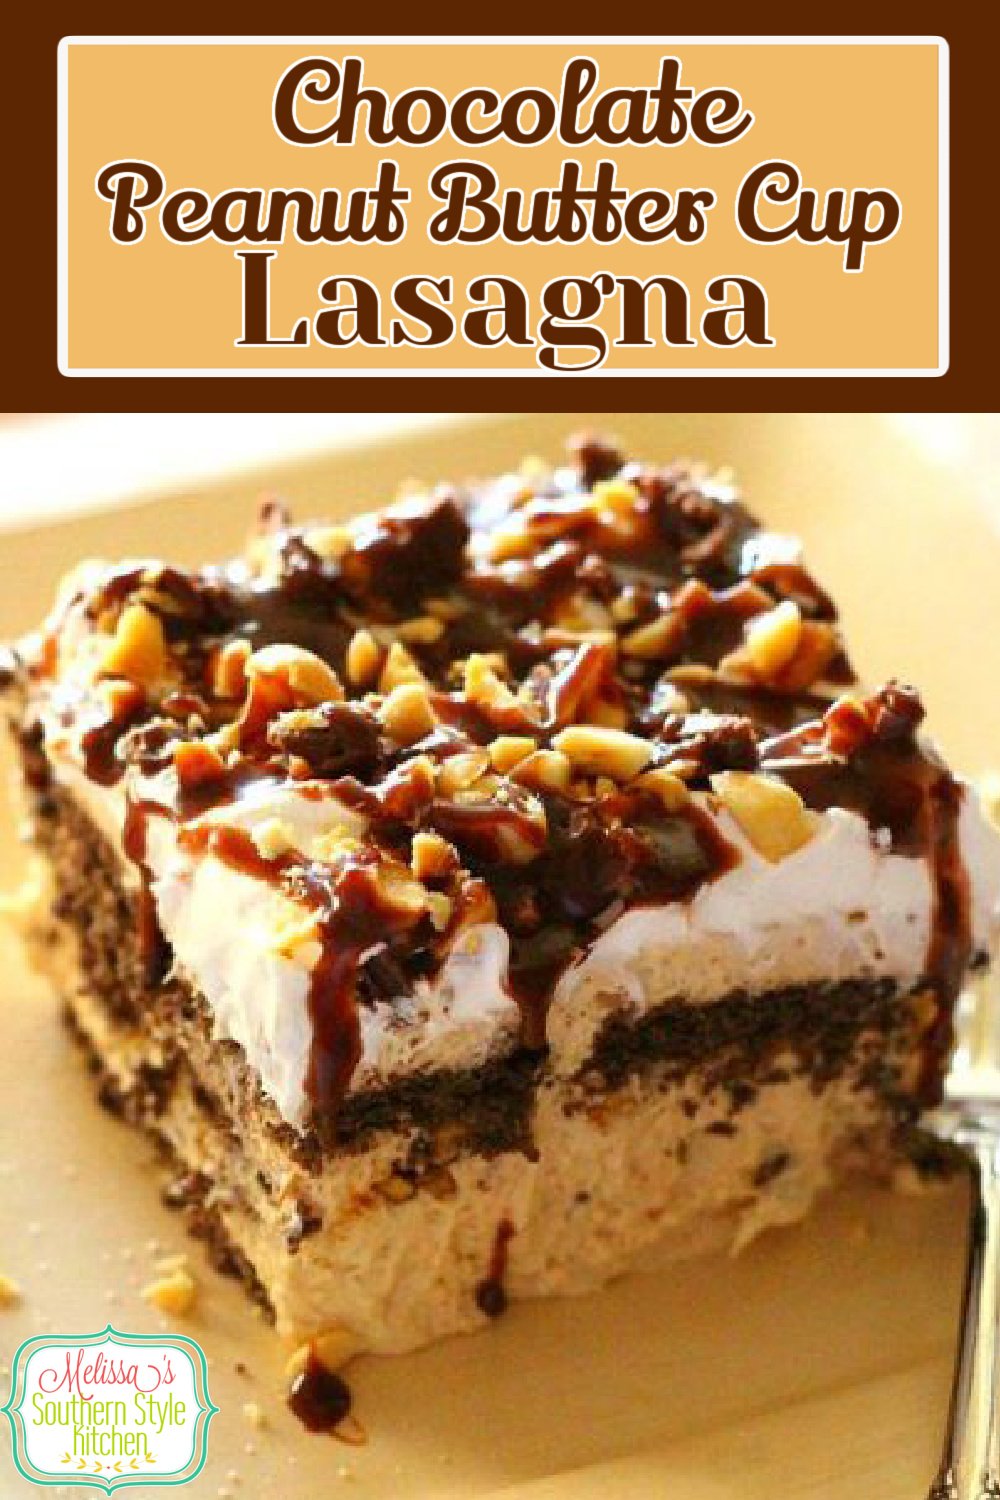 You'll be the dessert hero when you serve this Chocolate Peanut Butter Cup Lasagna for dessert! #peanutbuttercups #chocolate #chocolatelasagna #Reeses #lasagnarecipes #dessertlasagna #peanutbutter #desserts #dessertfoodrecipes #peanutbuttermousse #holidaydesserts #southernfood #southernrecipes